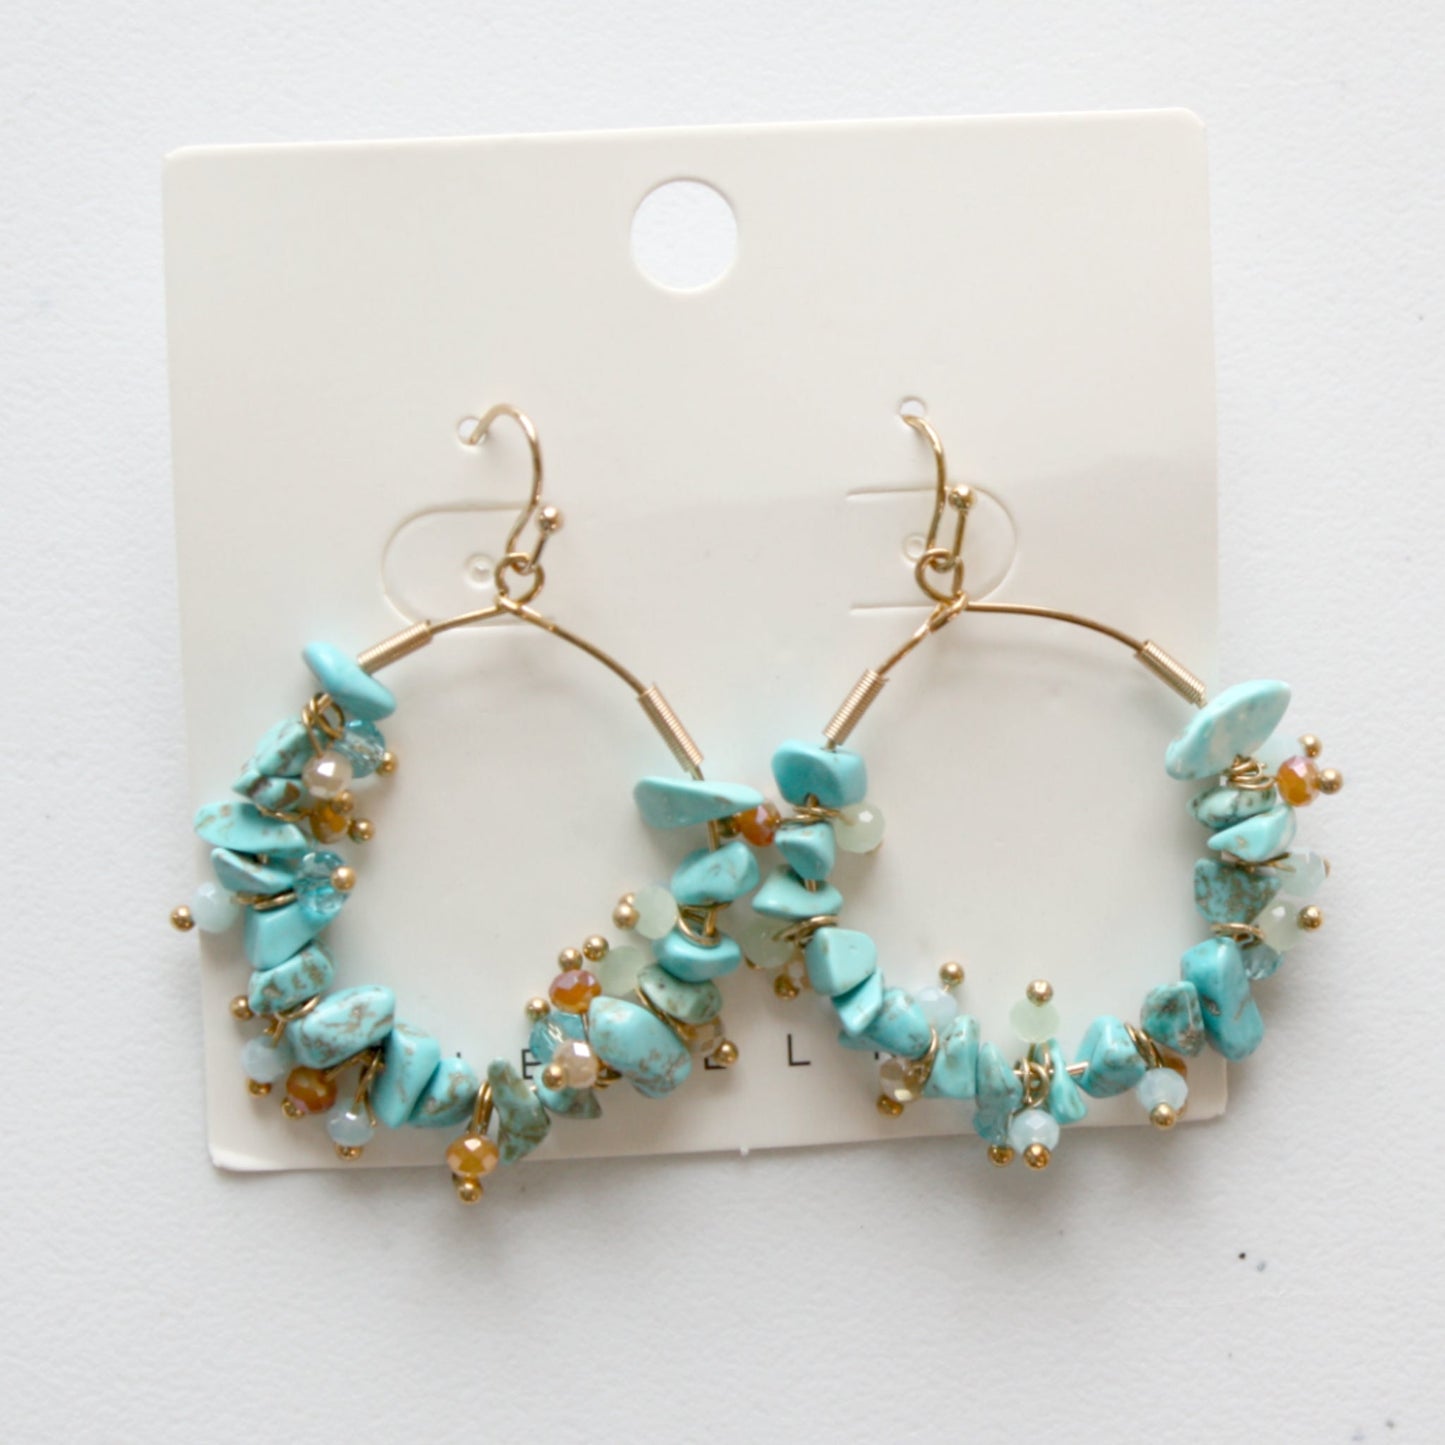 Turquoise Stone Boho Earrings - Made in the USA